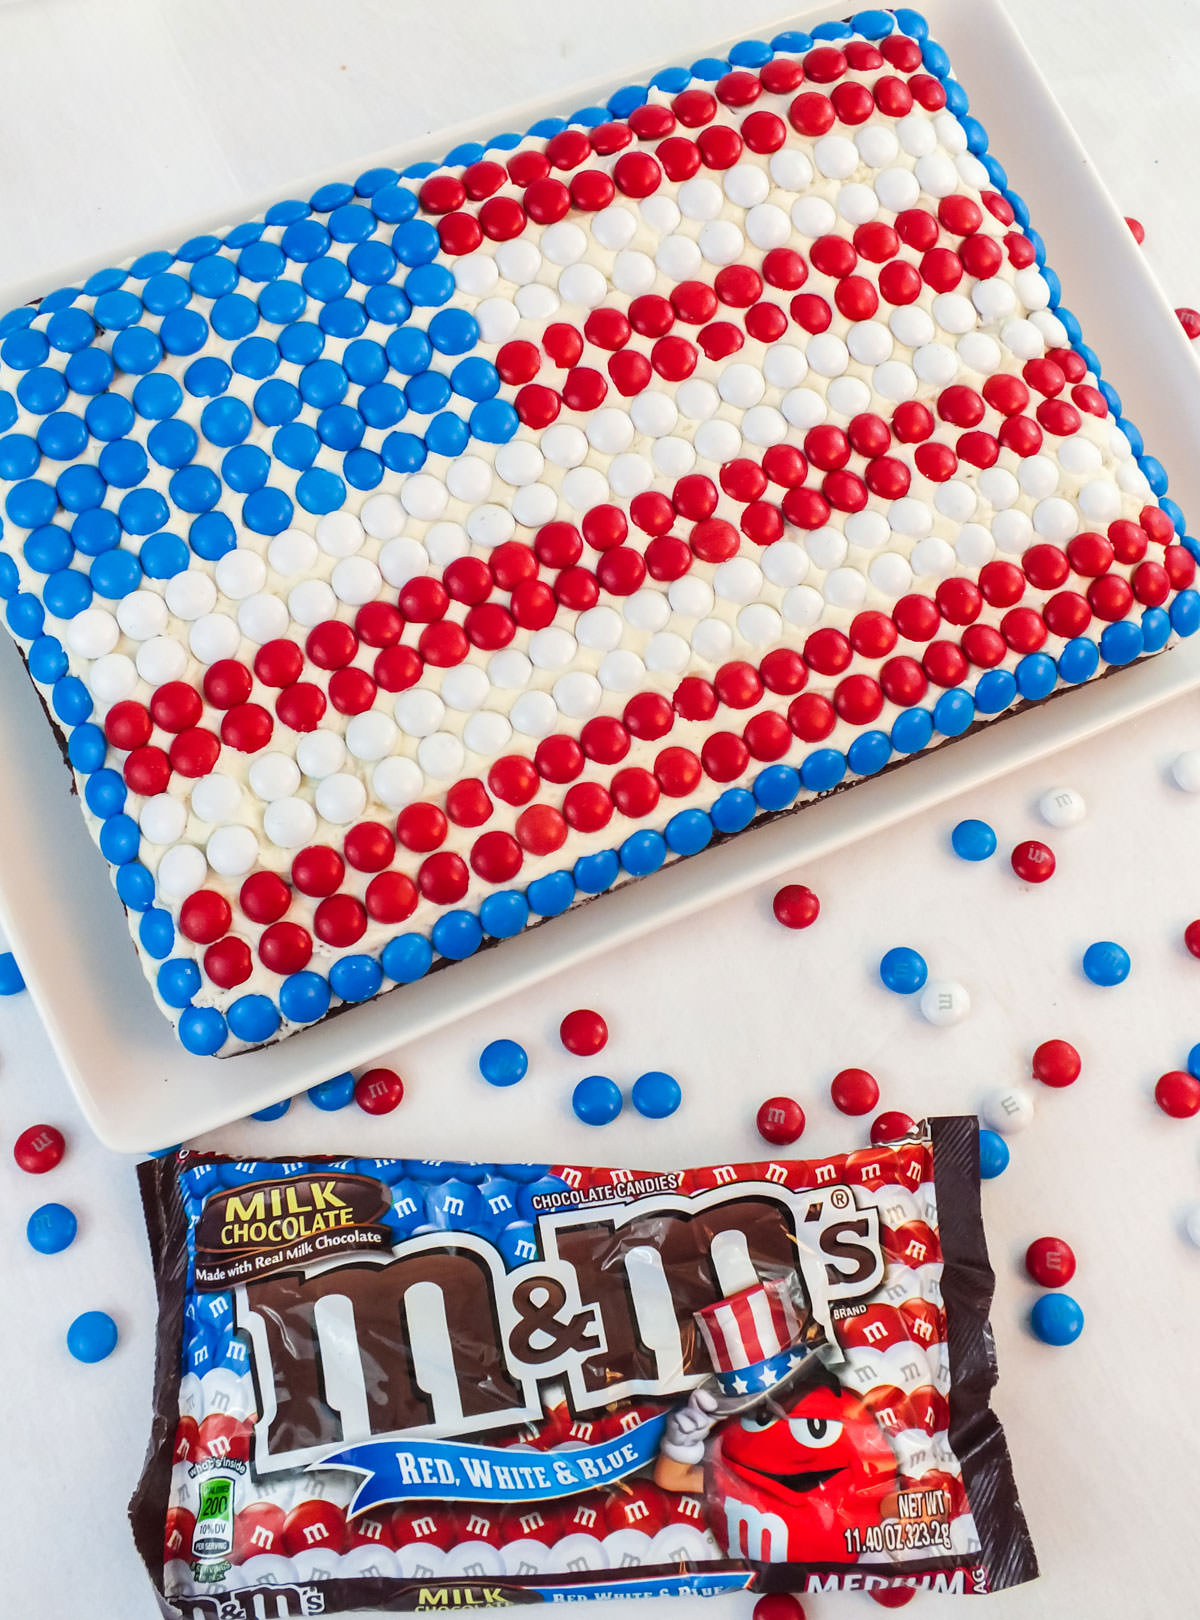 Closeup of an American Flag Cake sitting on a white cake platter on a white table next to a bag of Red White and Blue M&M's.